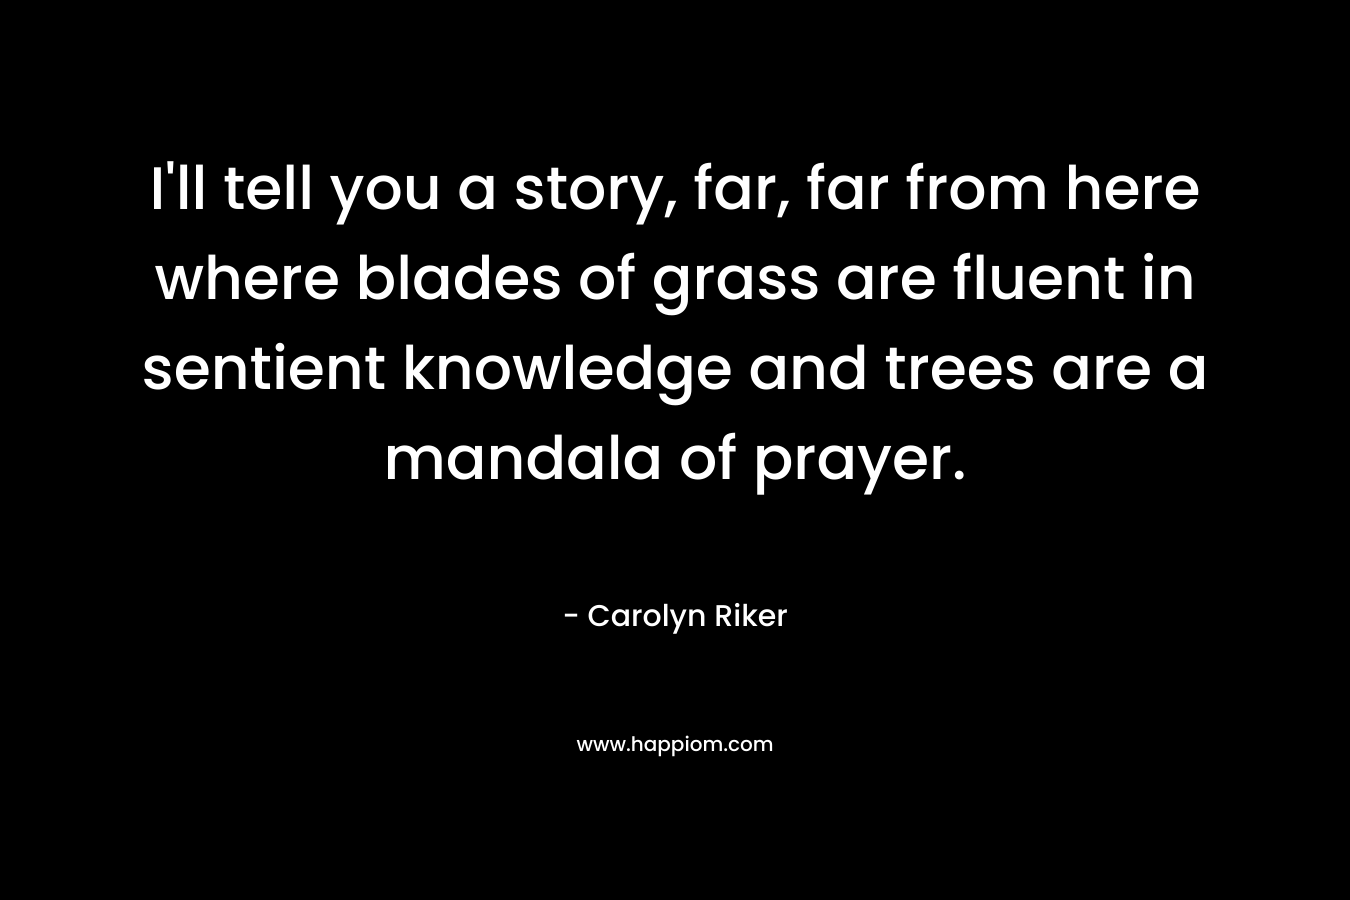 I’ll tell you a story, far, far from here where blades of grass are fluent in sentient knowledge and trees are a mandala of prayer. – Carolyn Riker